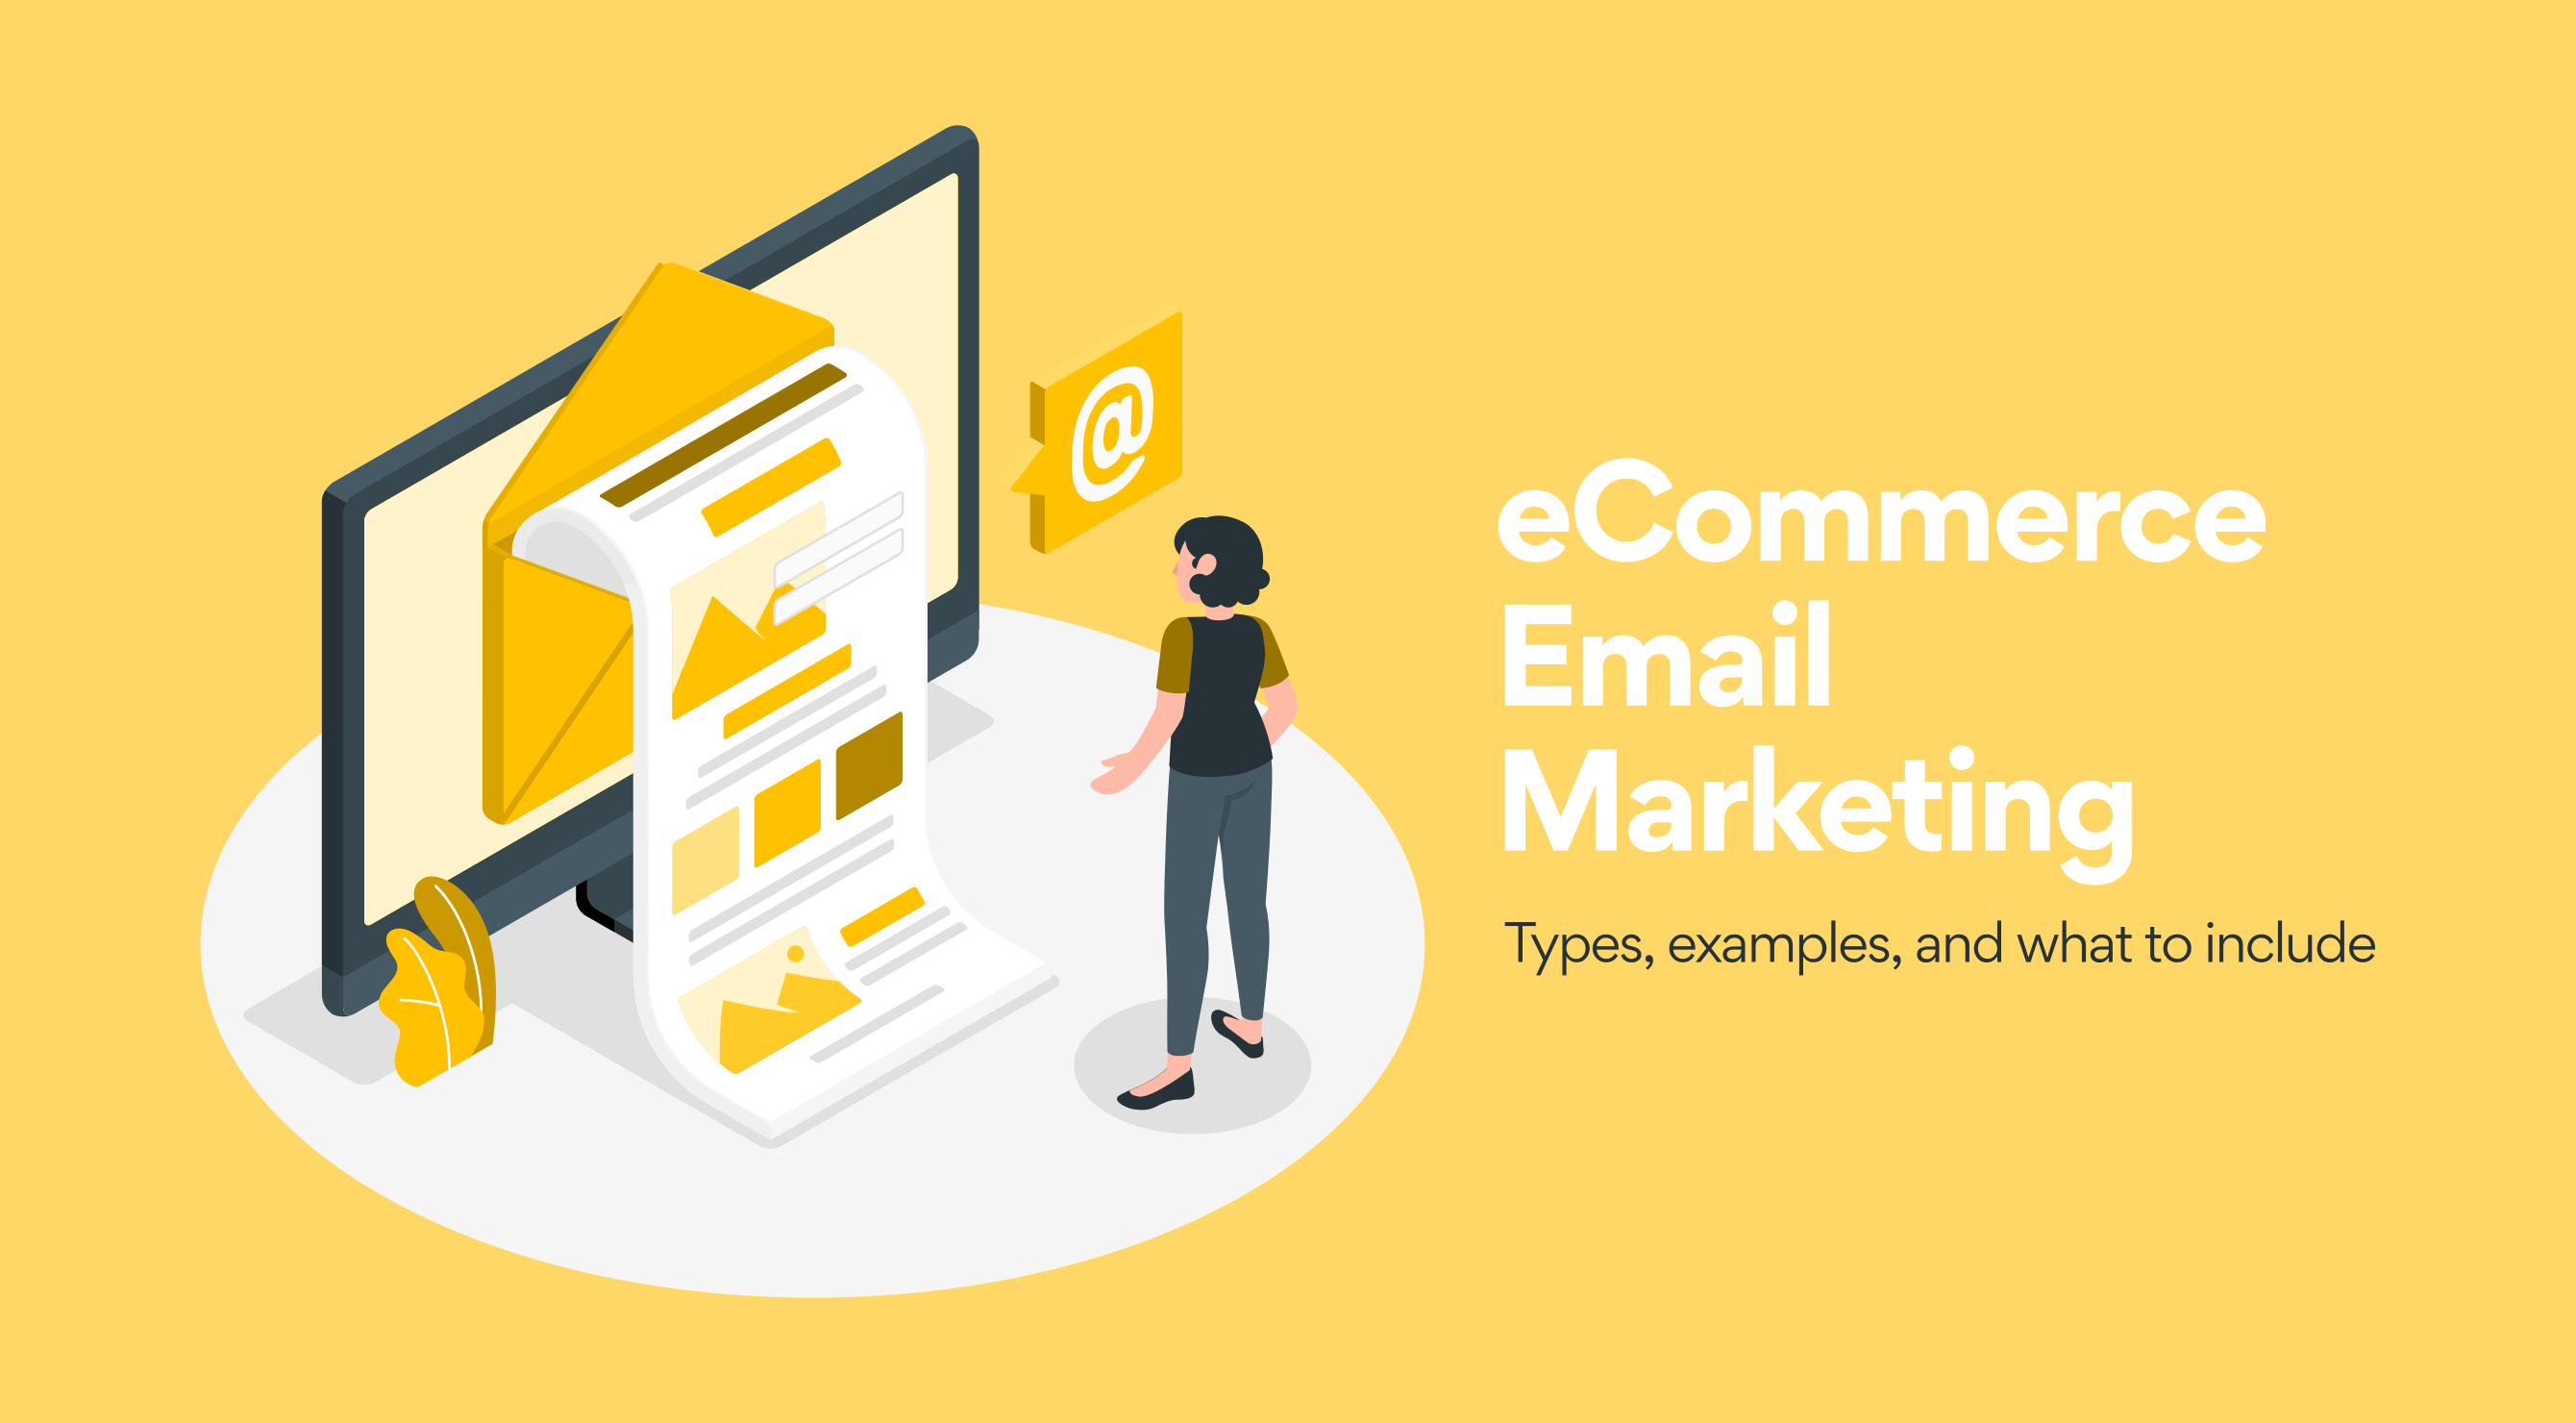 Pro Tips for eCommerce Email Marketing